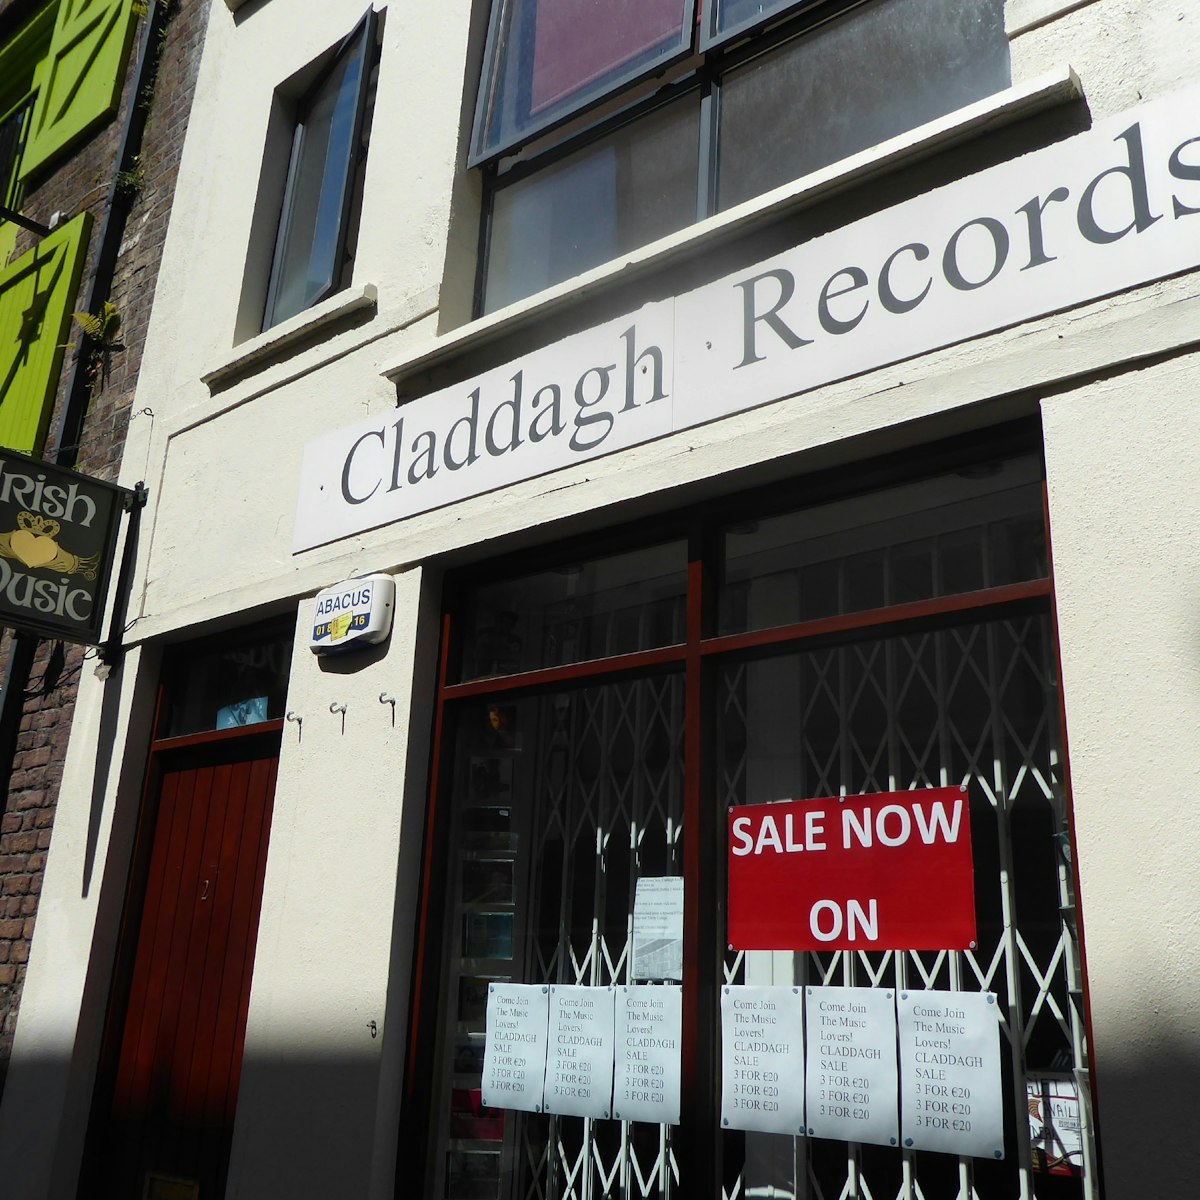 A close-up of Claddagh Records sign, Temple Bar